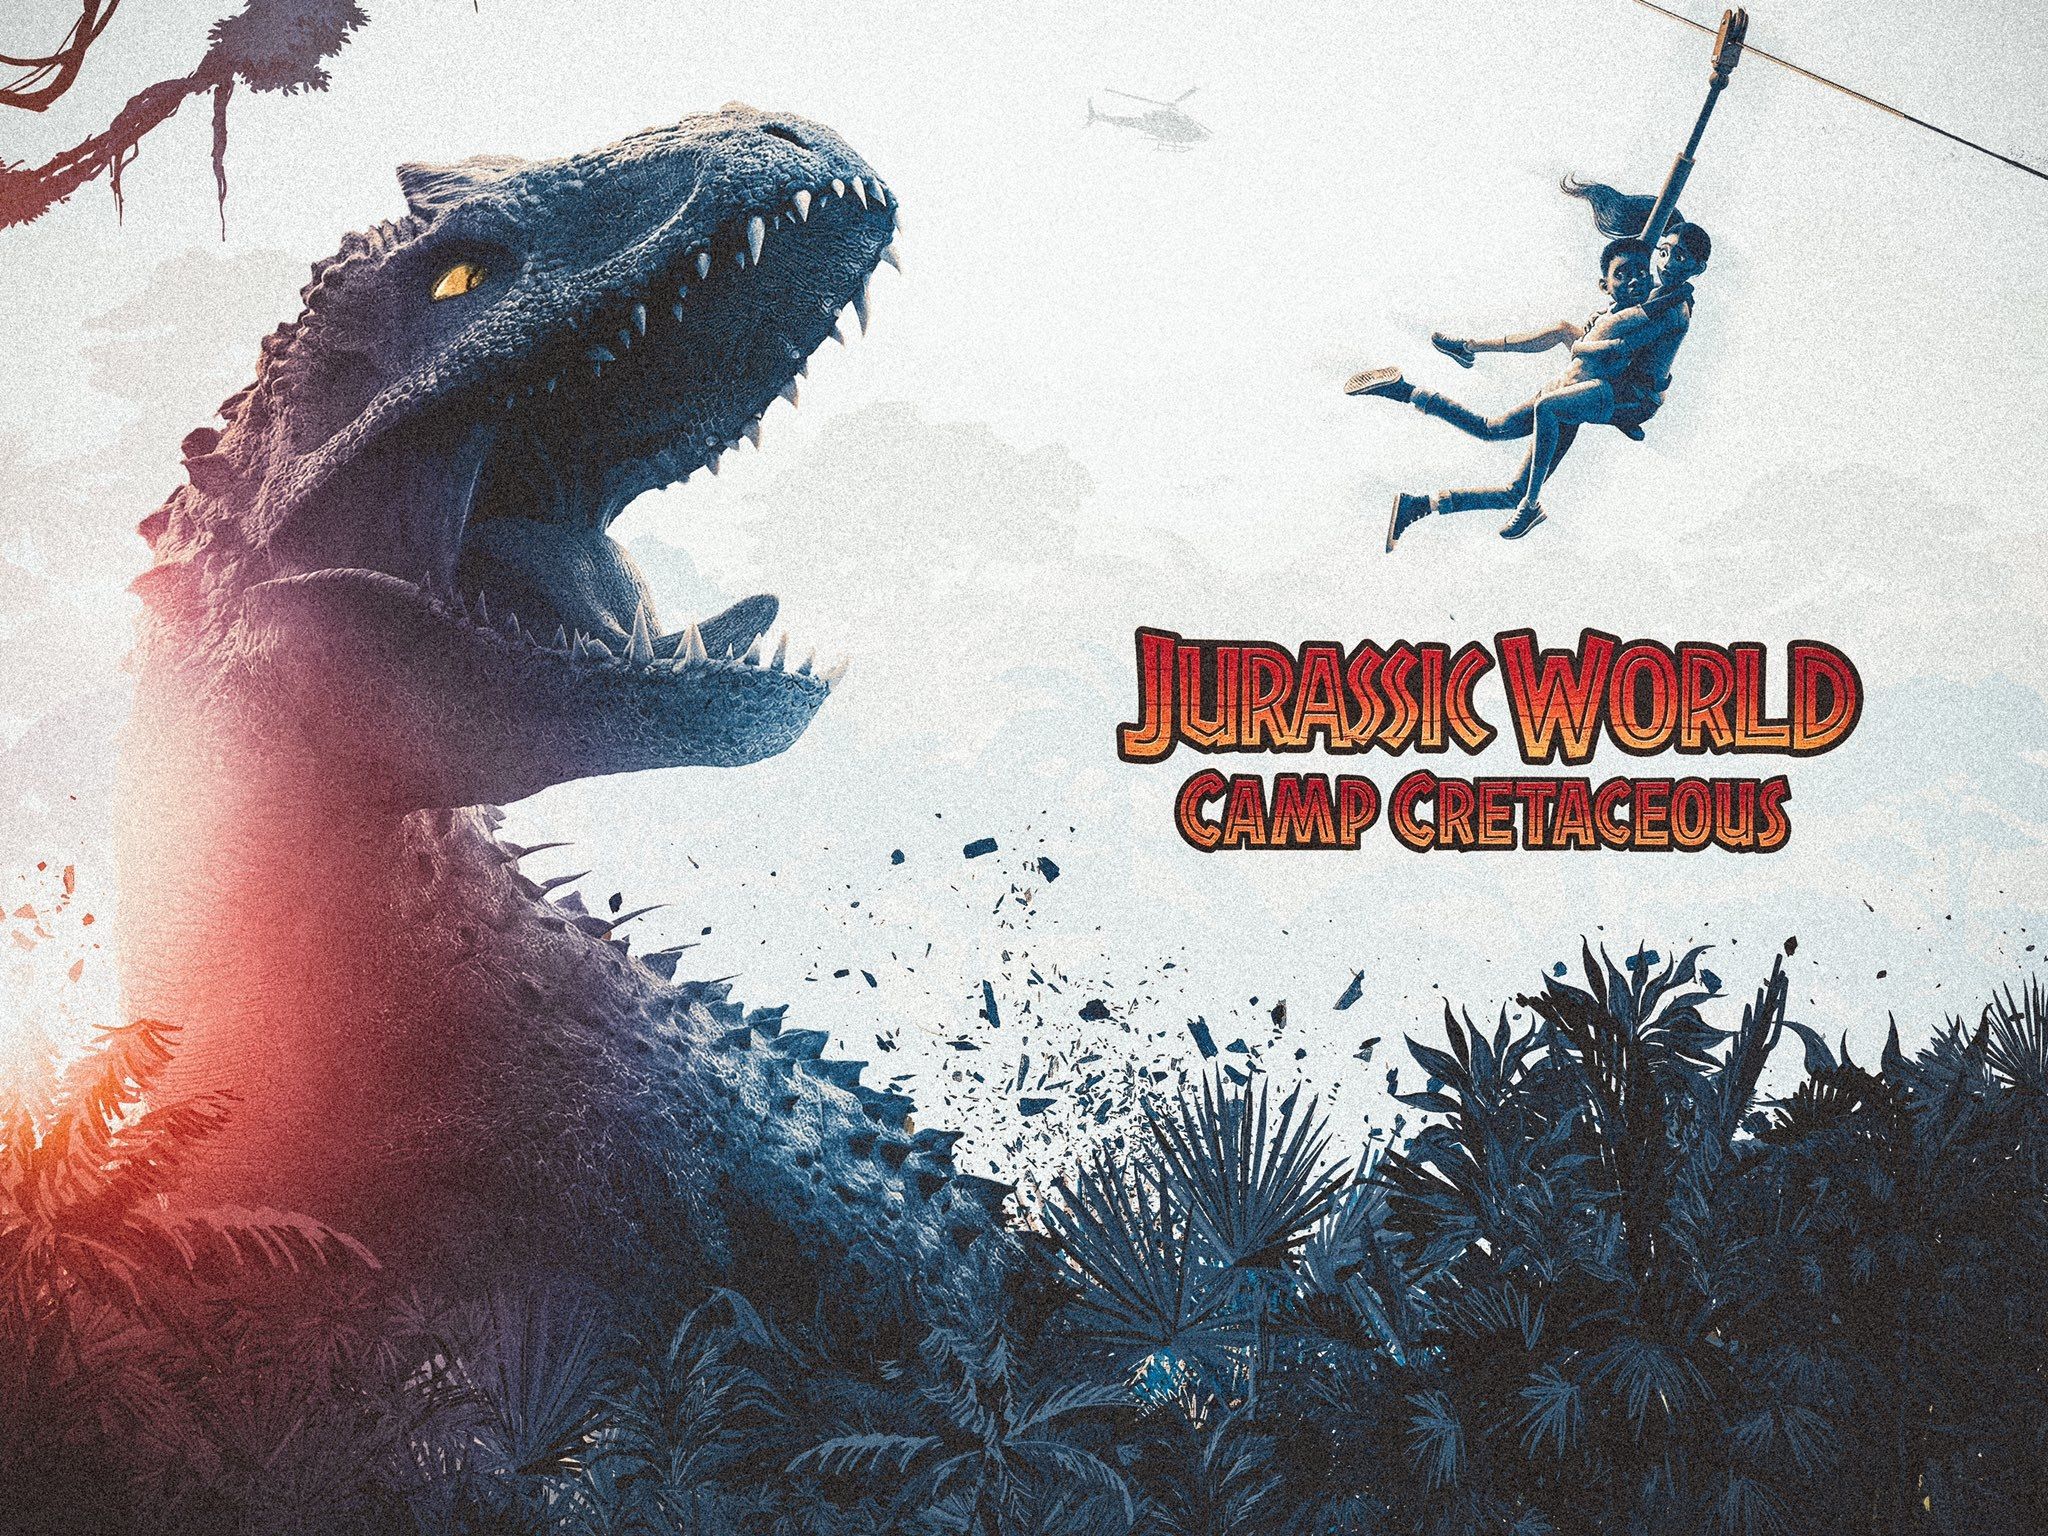 Jurassic World Camp Cretaceous Fan Poster Wallpaper, HD Movies 4K Wallpaper, Image, Photo and Background